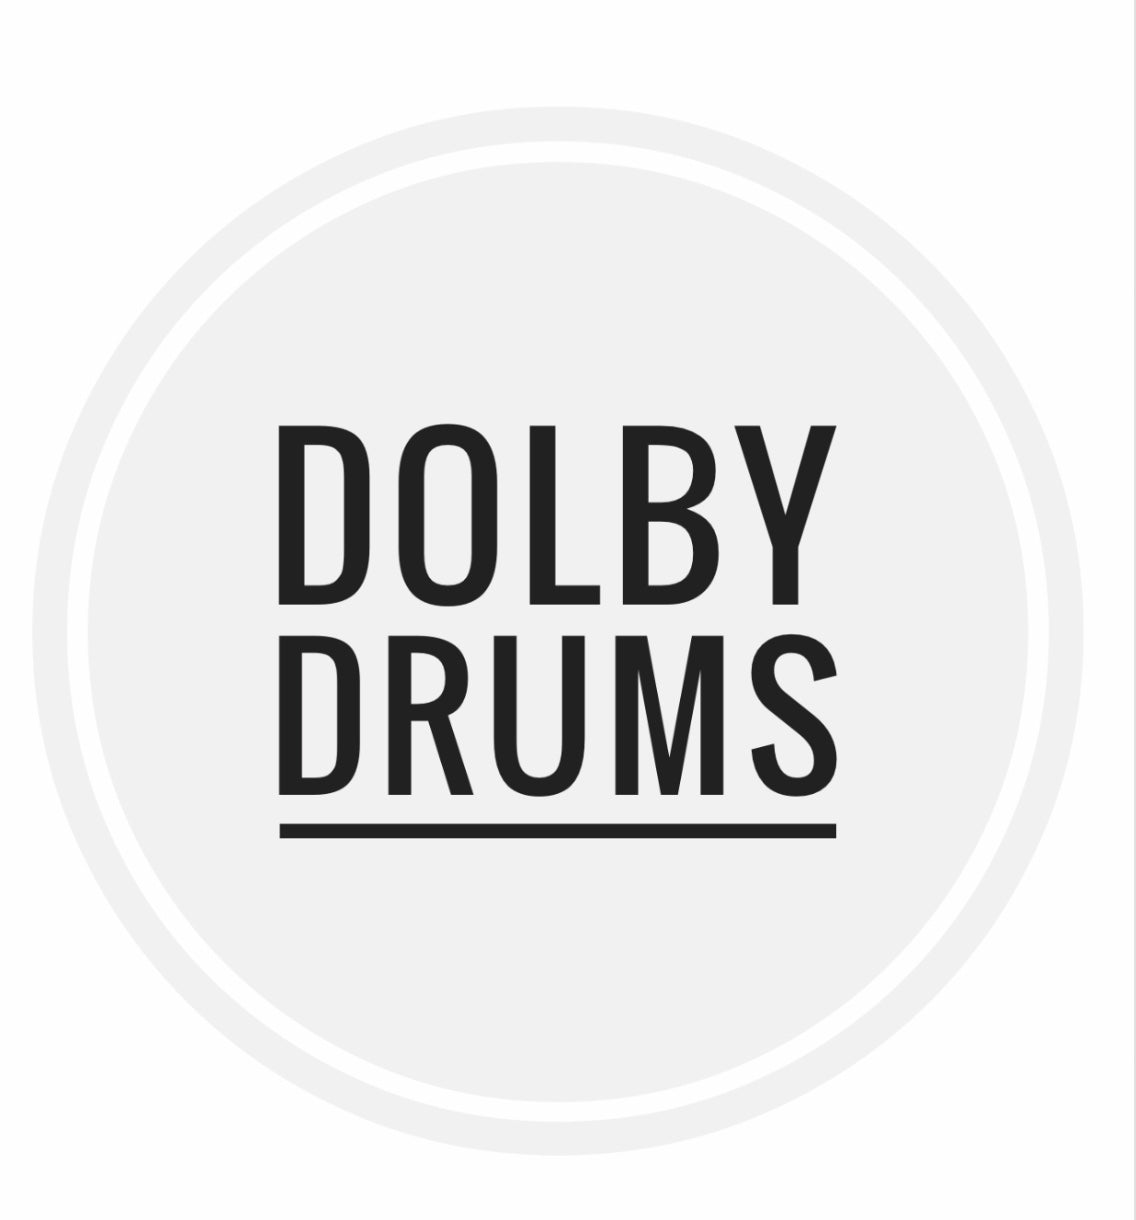 DOLBY DRUMS GIFT CARD